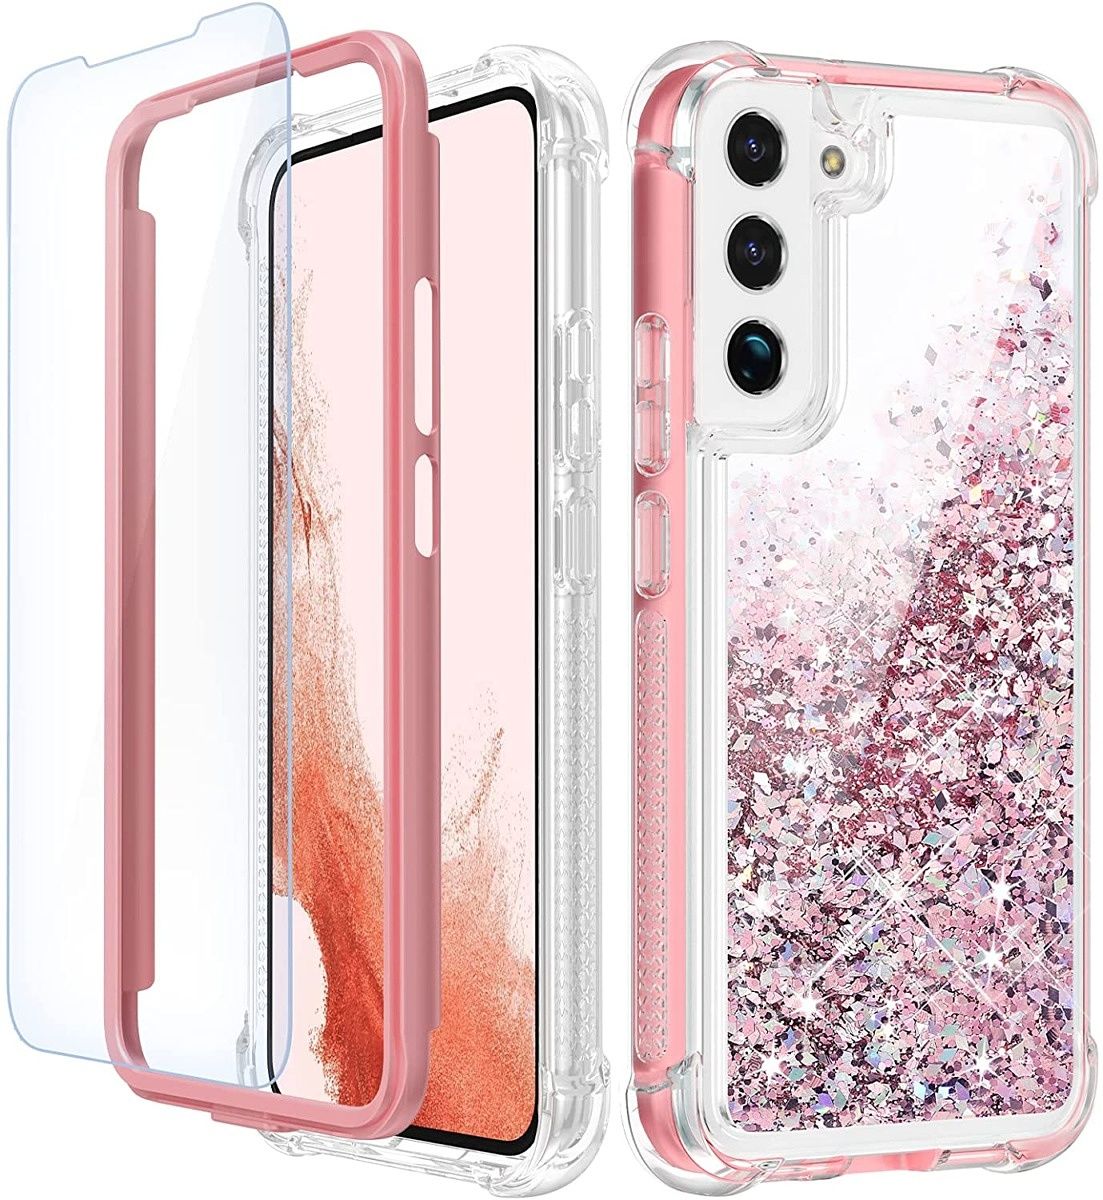 If you like your case to stand out and look shiny, you can't really go wrong with this one. Adds a lot of bling to the back!